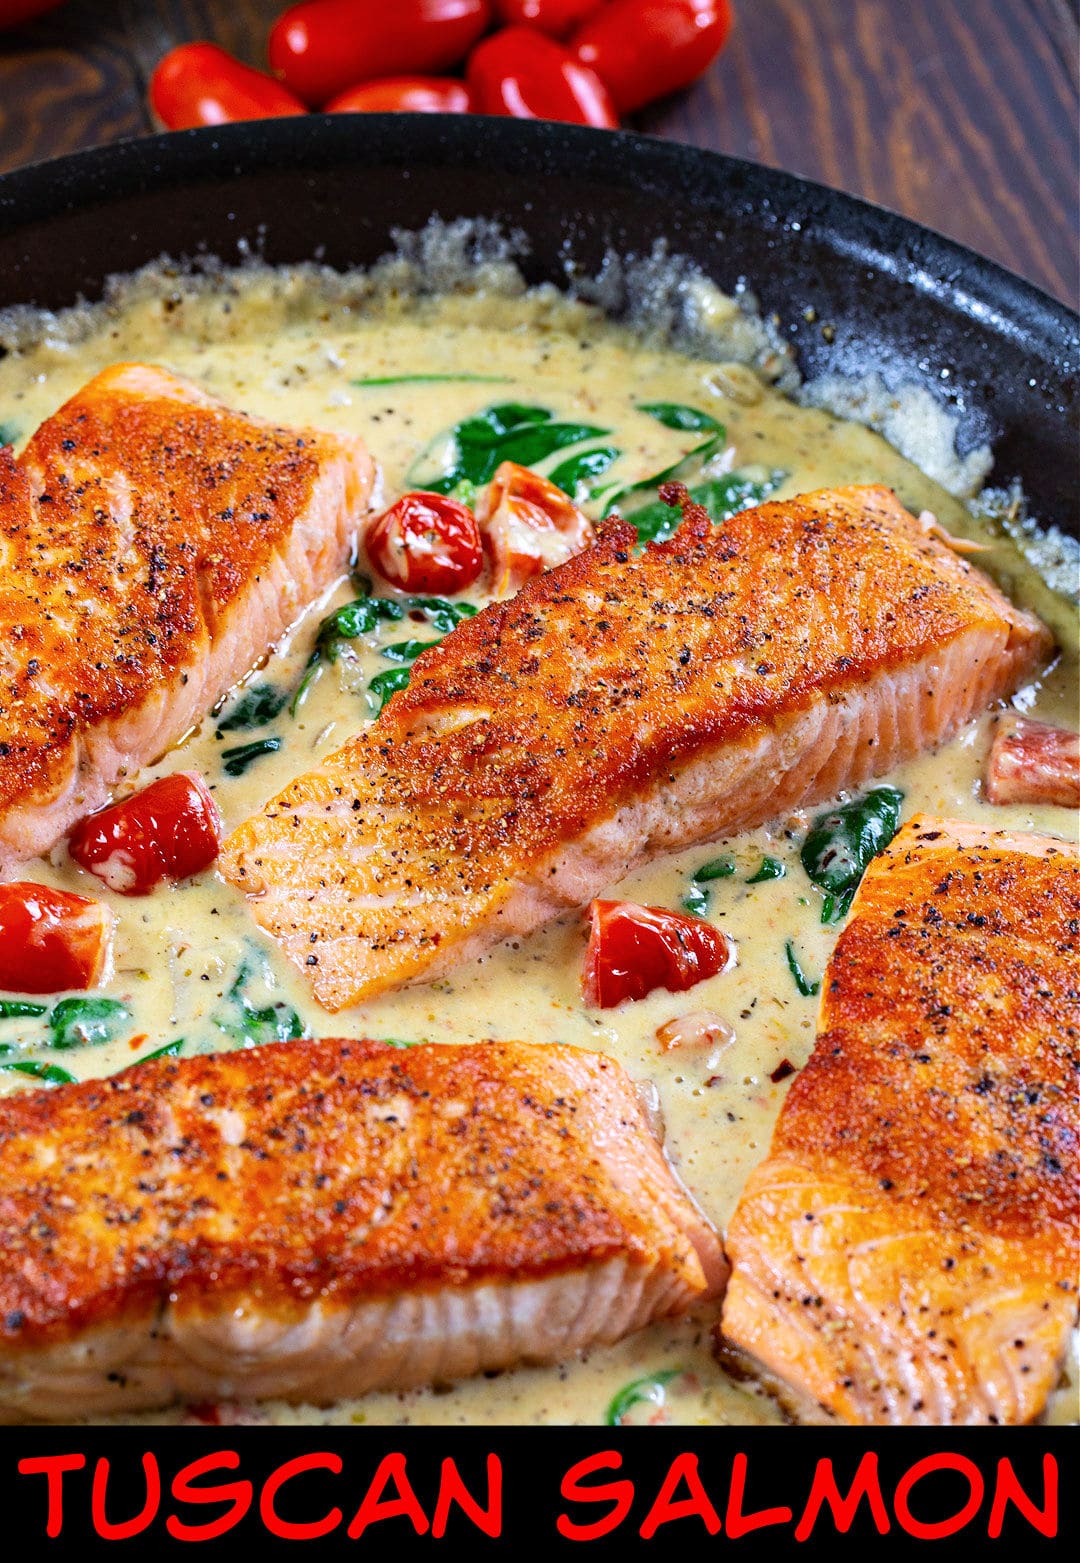 Tuscan Salmon fillets in skillet with creamy sauce.